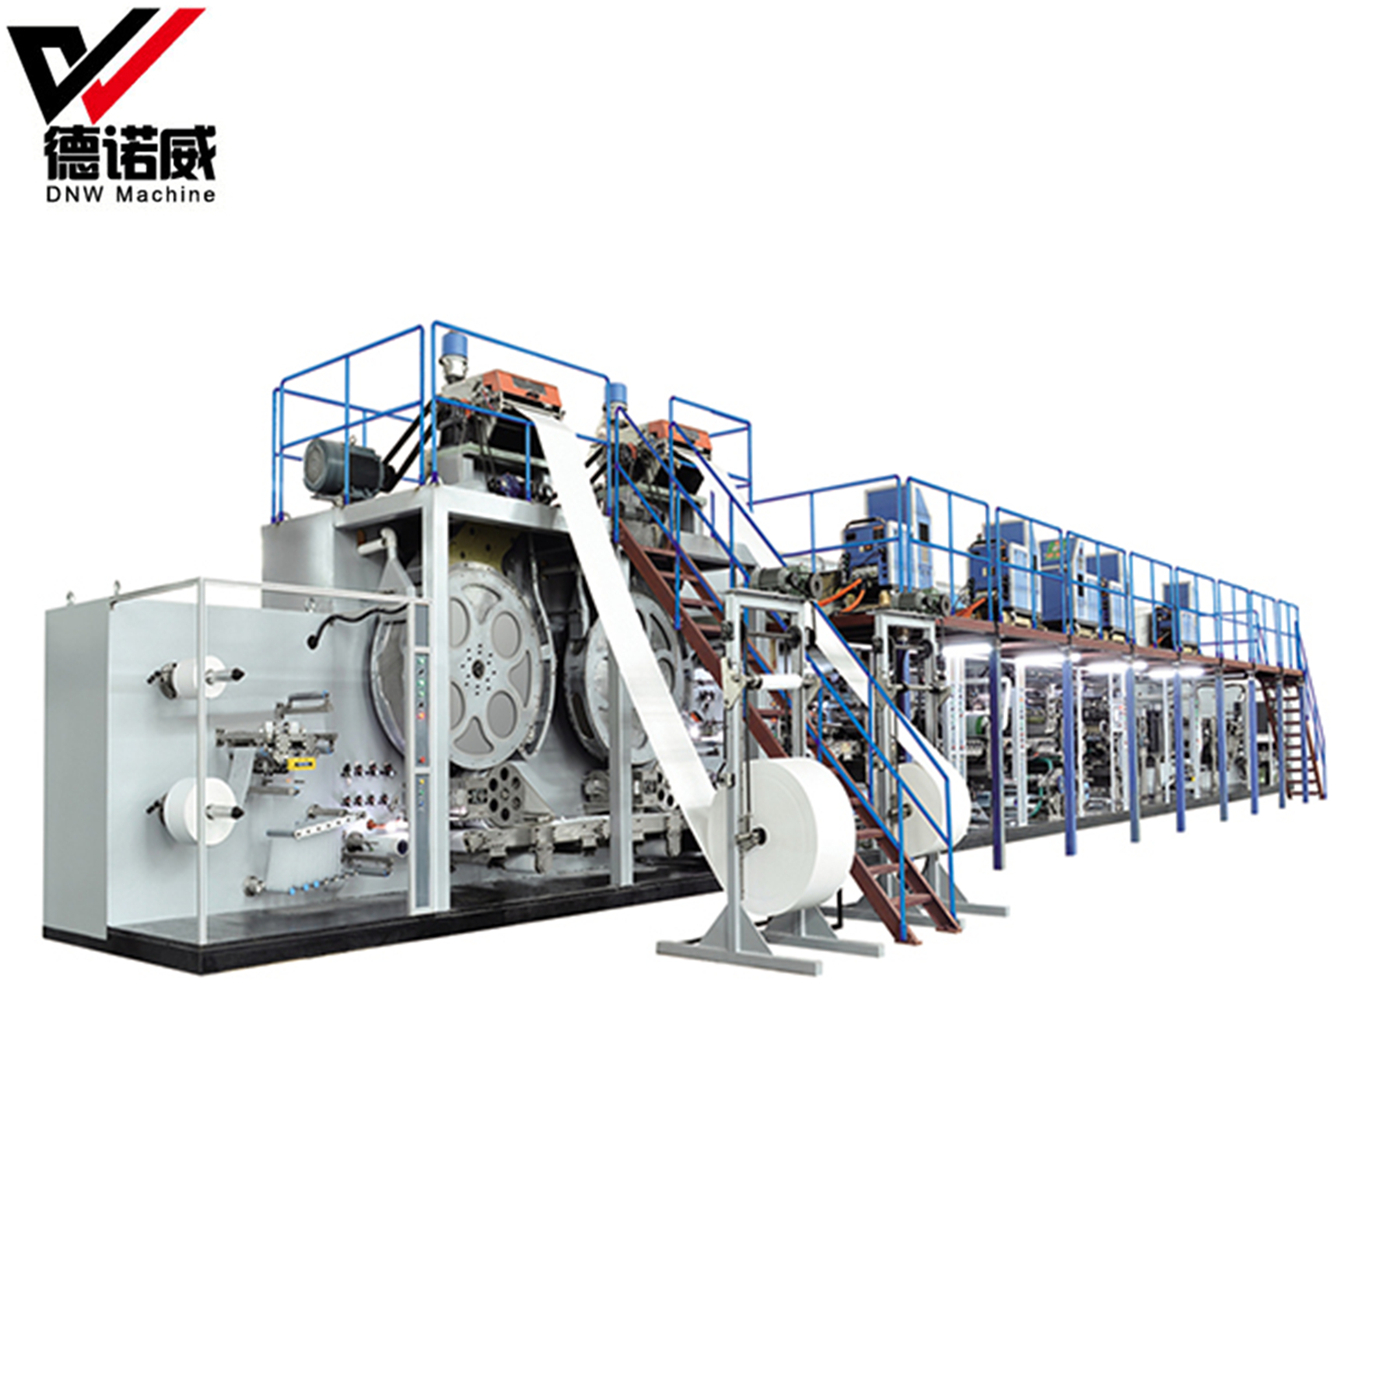 DNW-41 Full Automatic Adult Diaper Making Machine Adult Nappy Machine Suppliers 